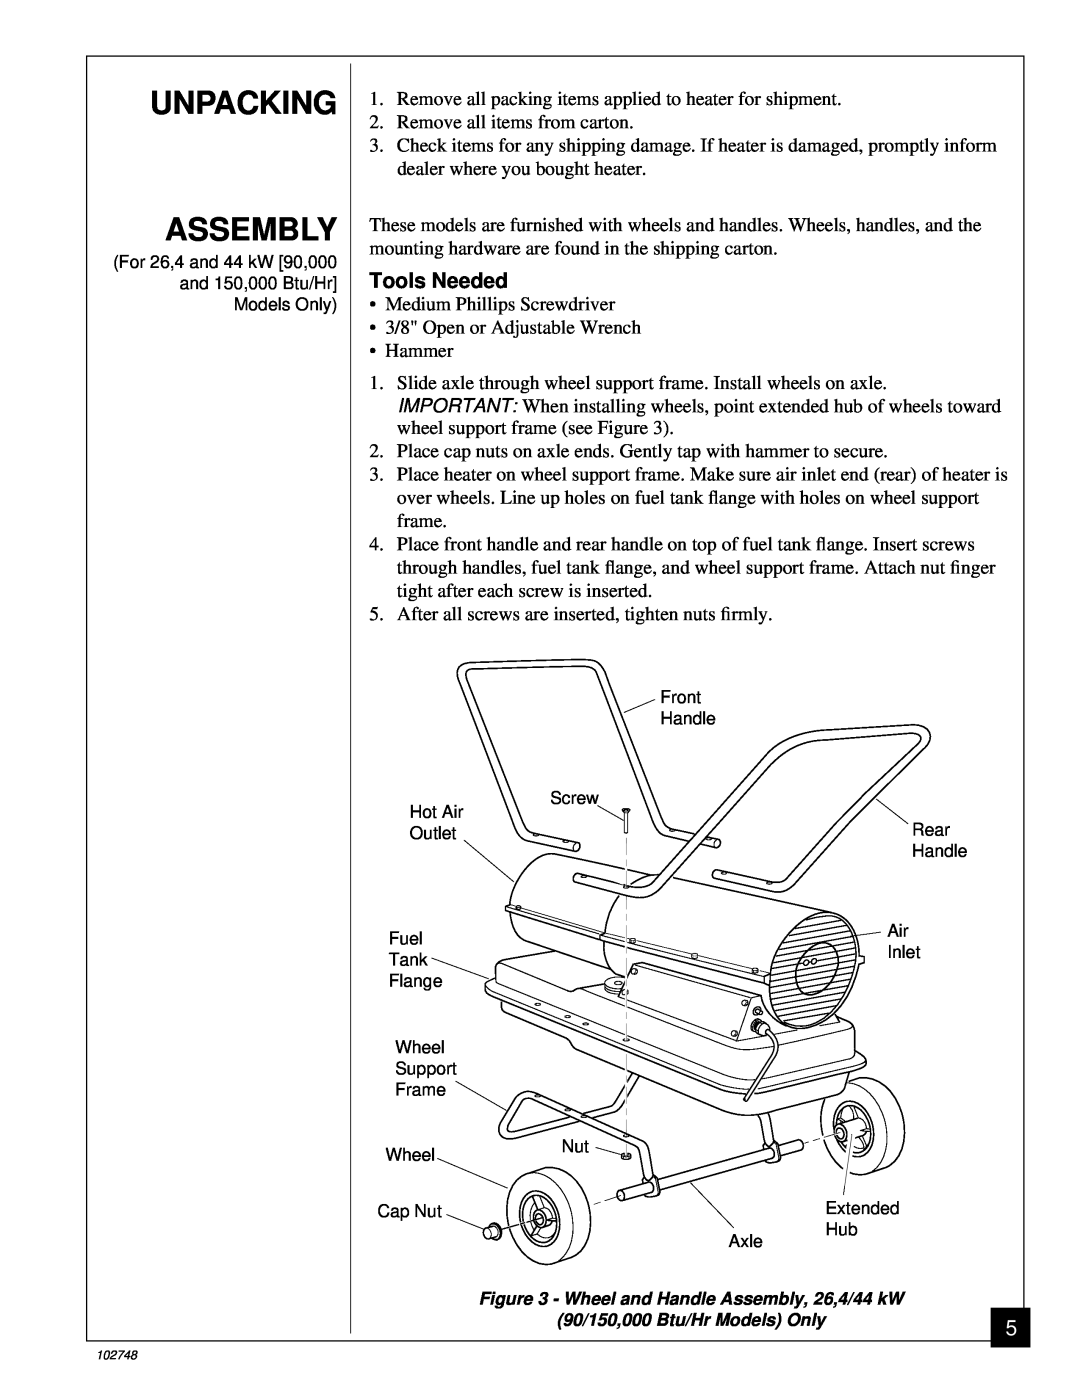 Desa 000) 26, 000) 20 owner manual Unpacking Assembly, Tools Needed 